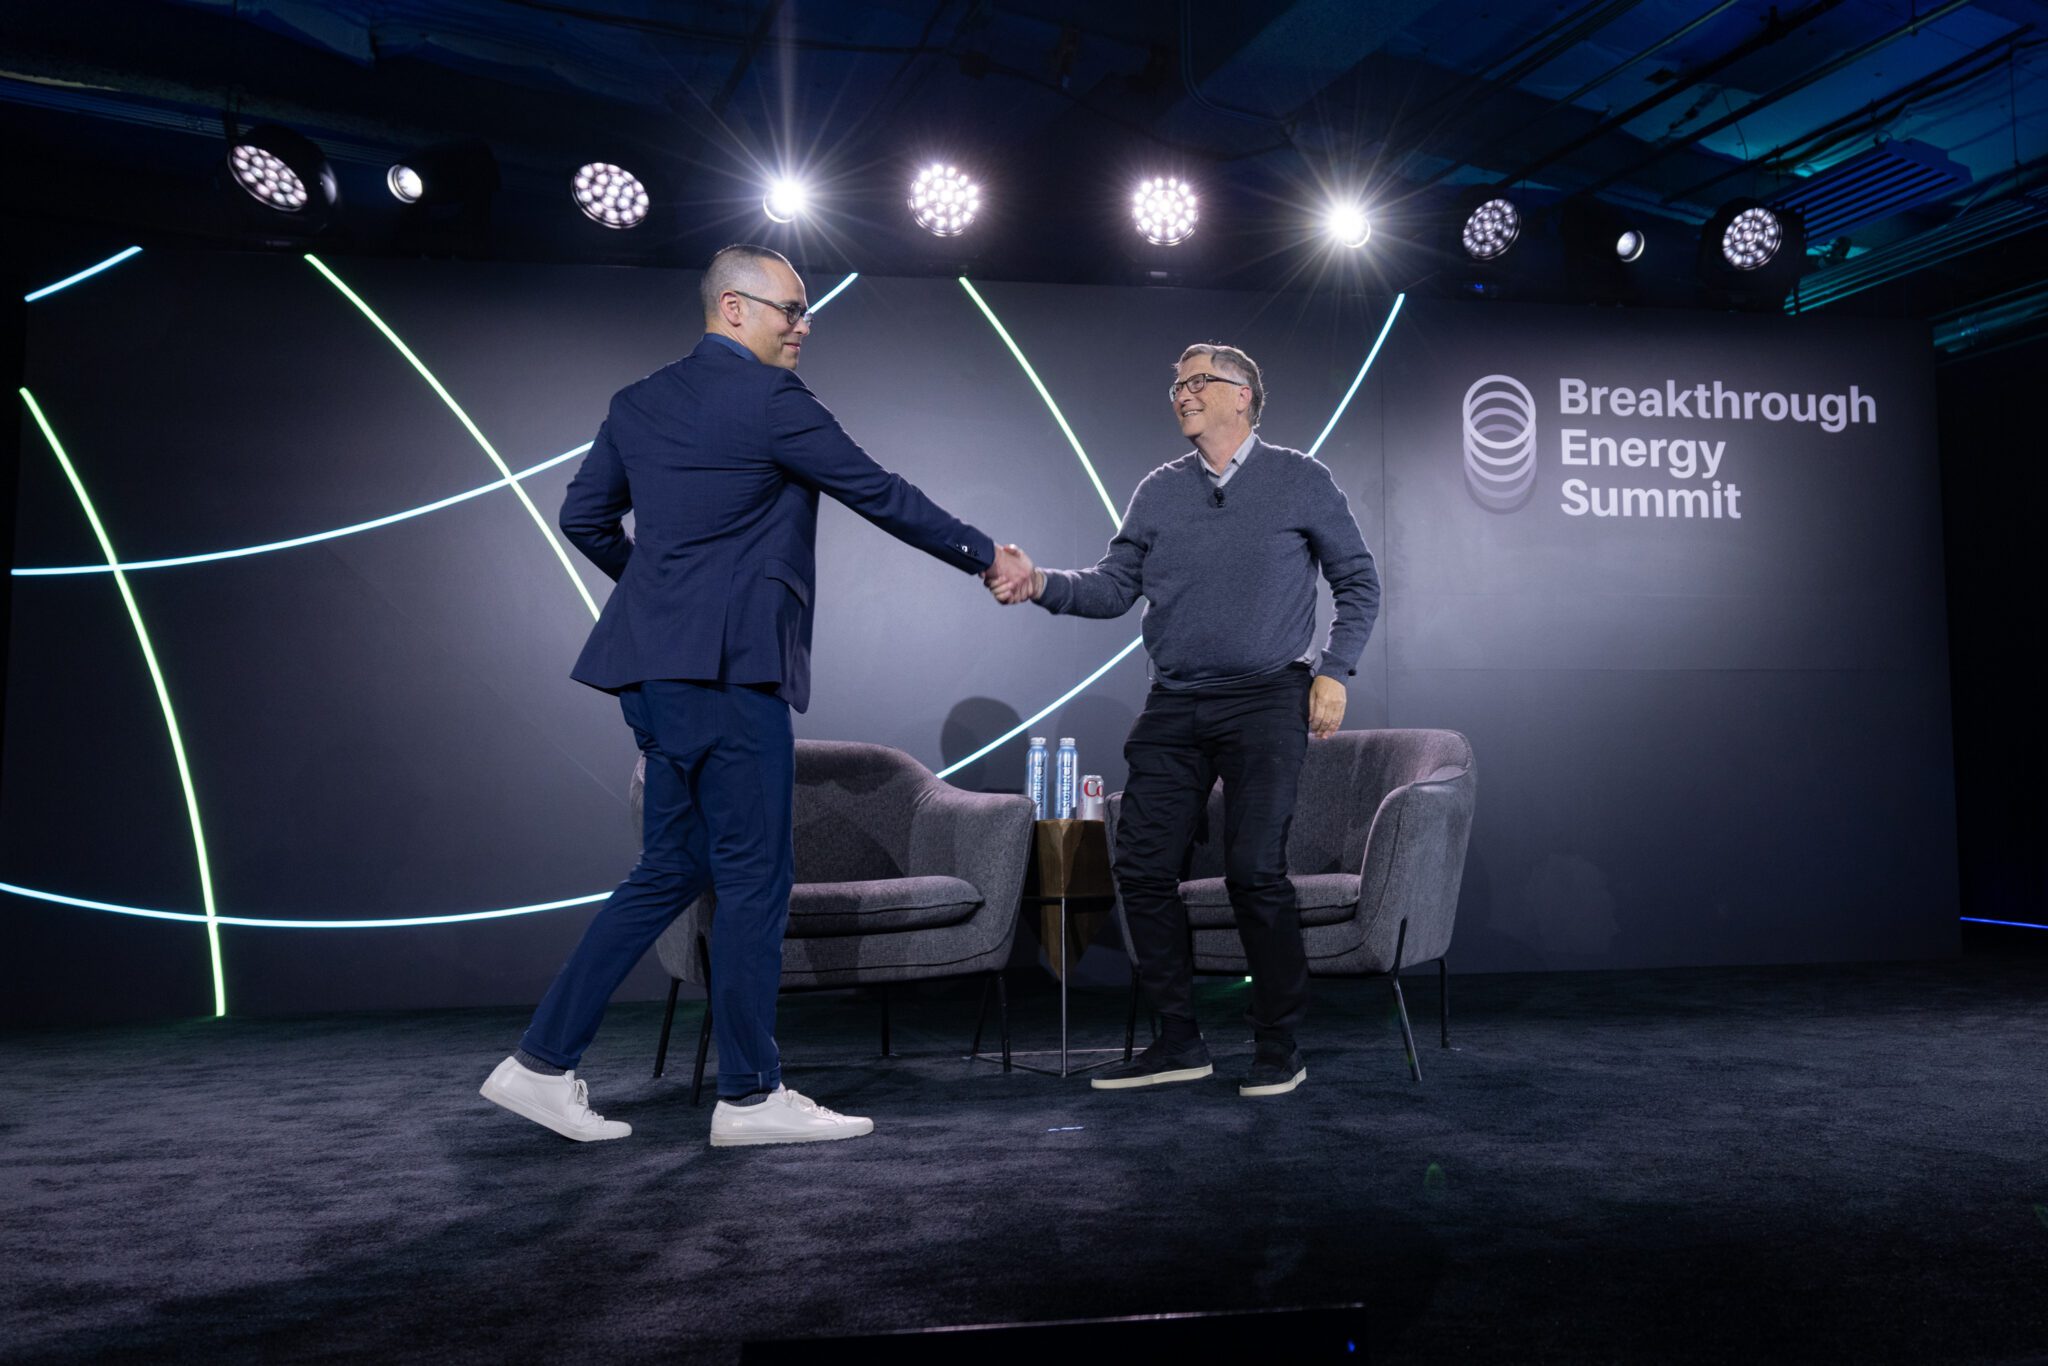 Bill Gates and Breakthrough Energy Executive Director Rodi Guidero on stage at the Breakthrough Energy Summit